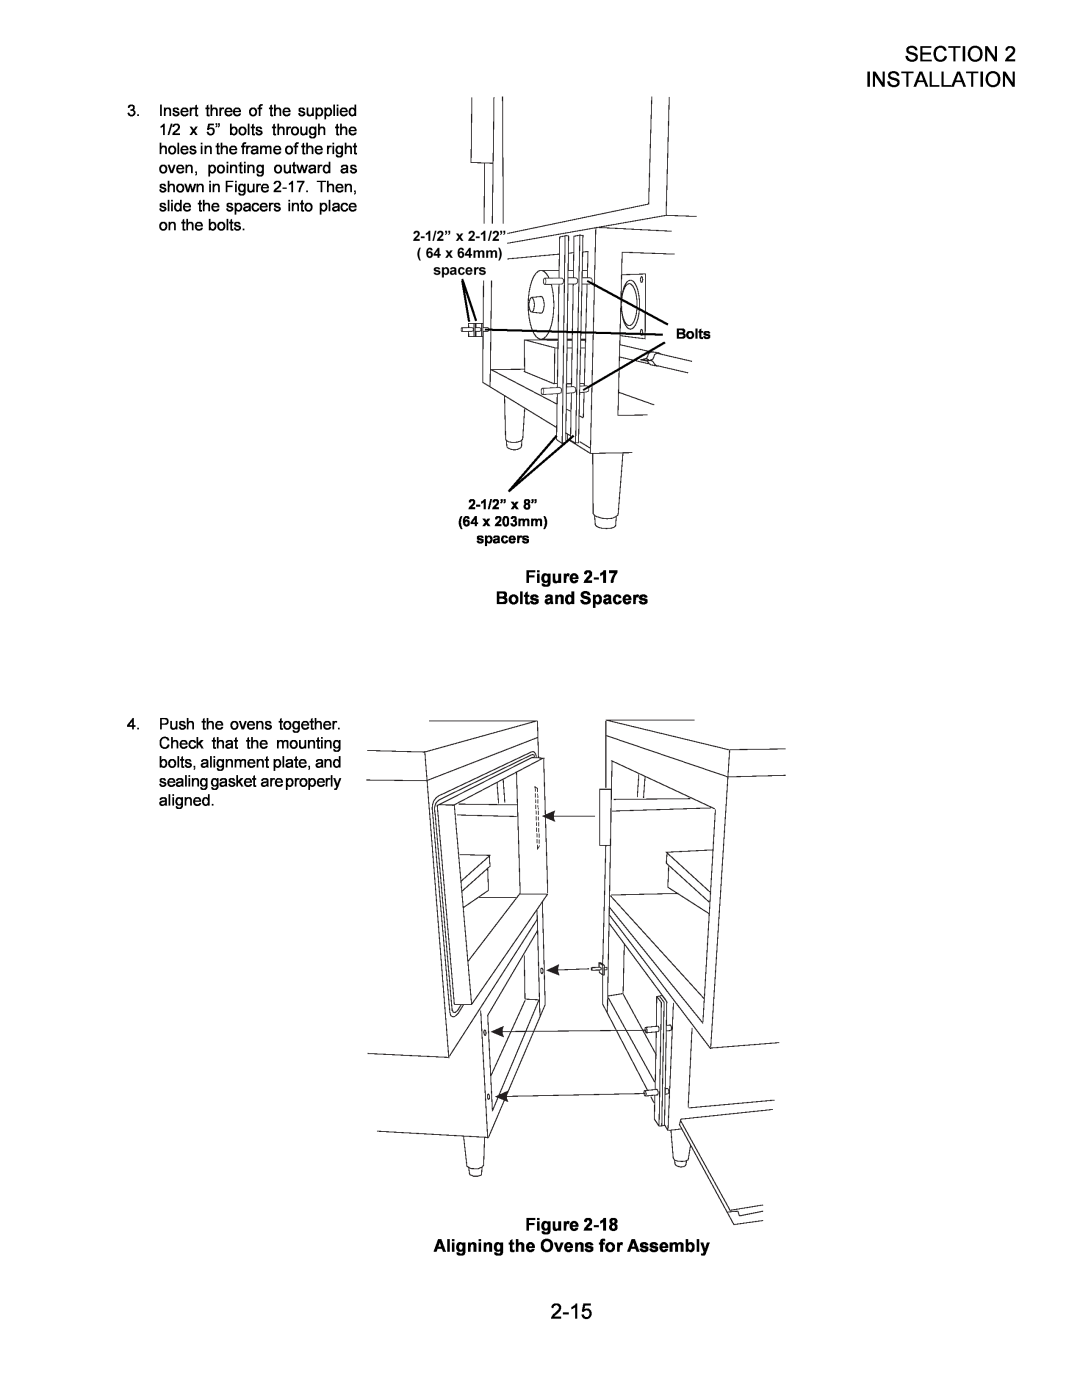 Middleby Marshall owner manual 2-15, Bolts and Spacers, Aligning the Ovens for Assembly, Section Installation, spacers 